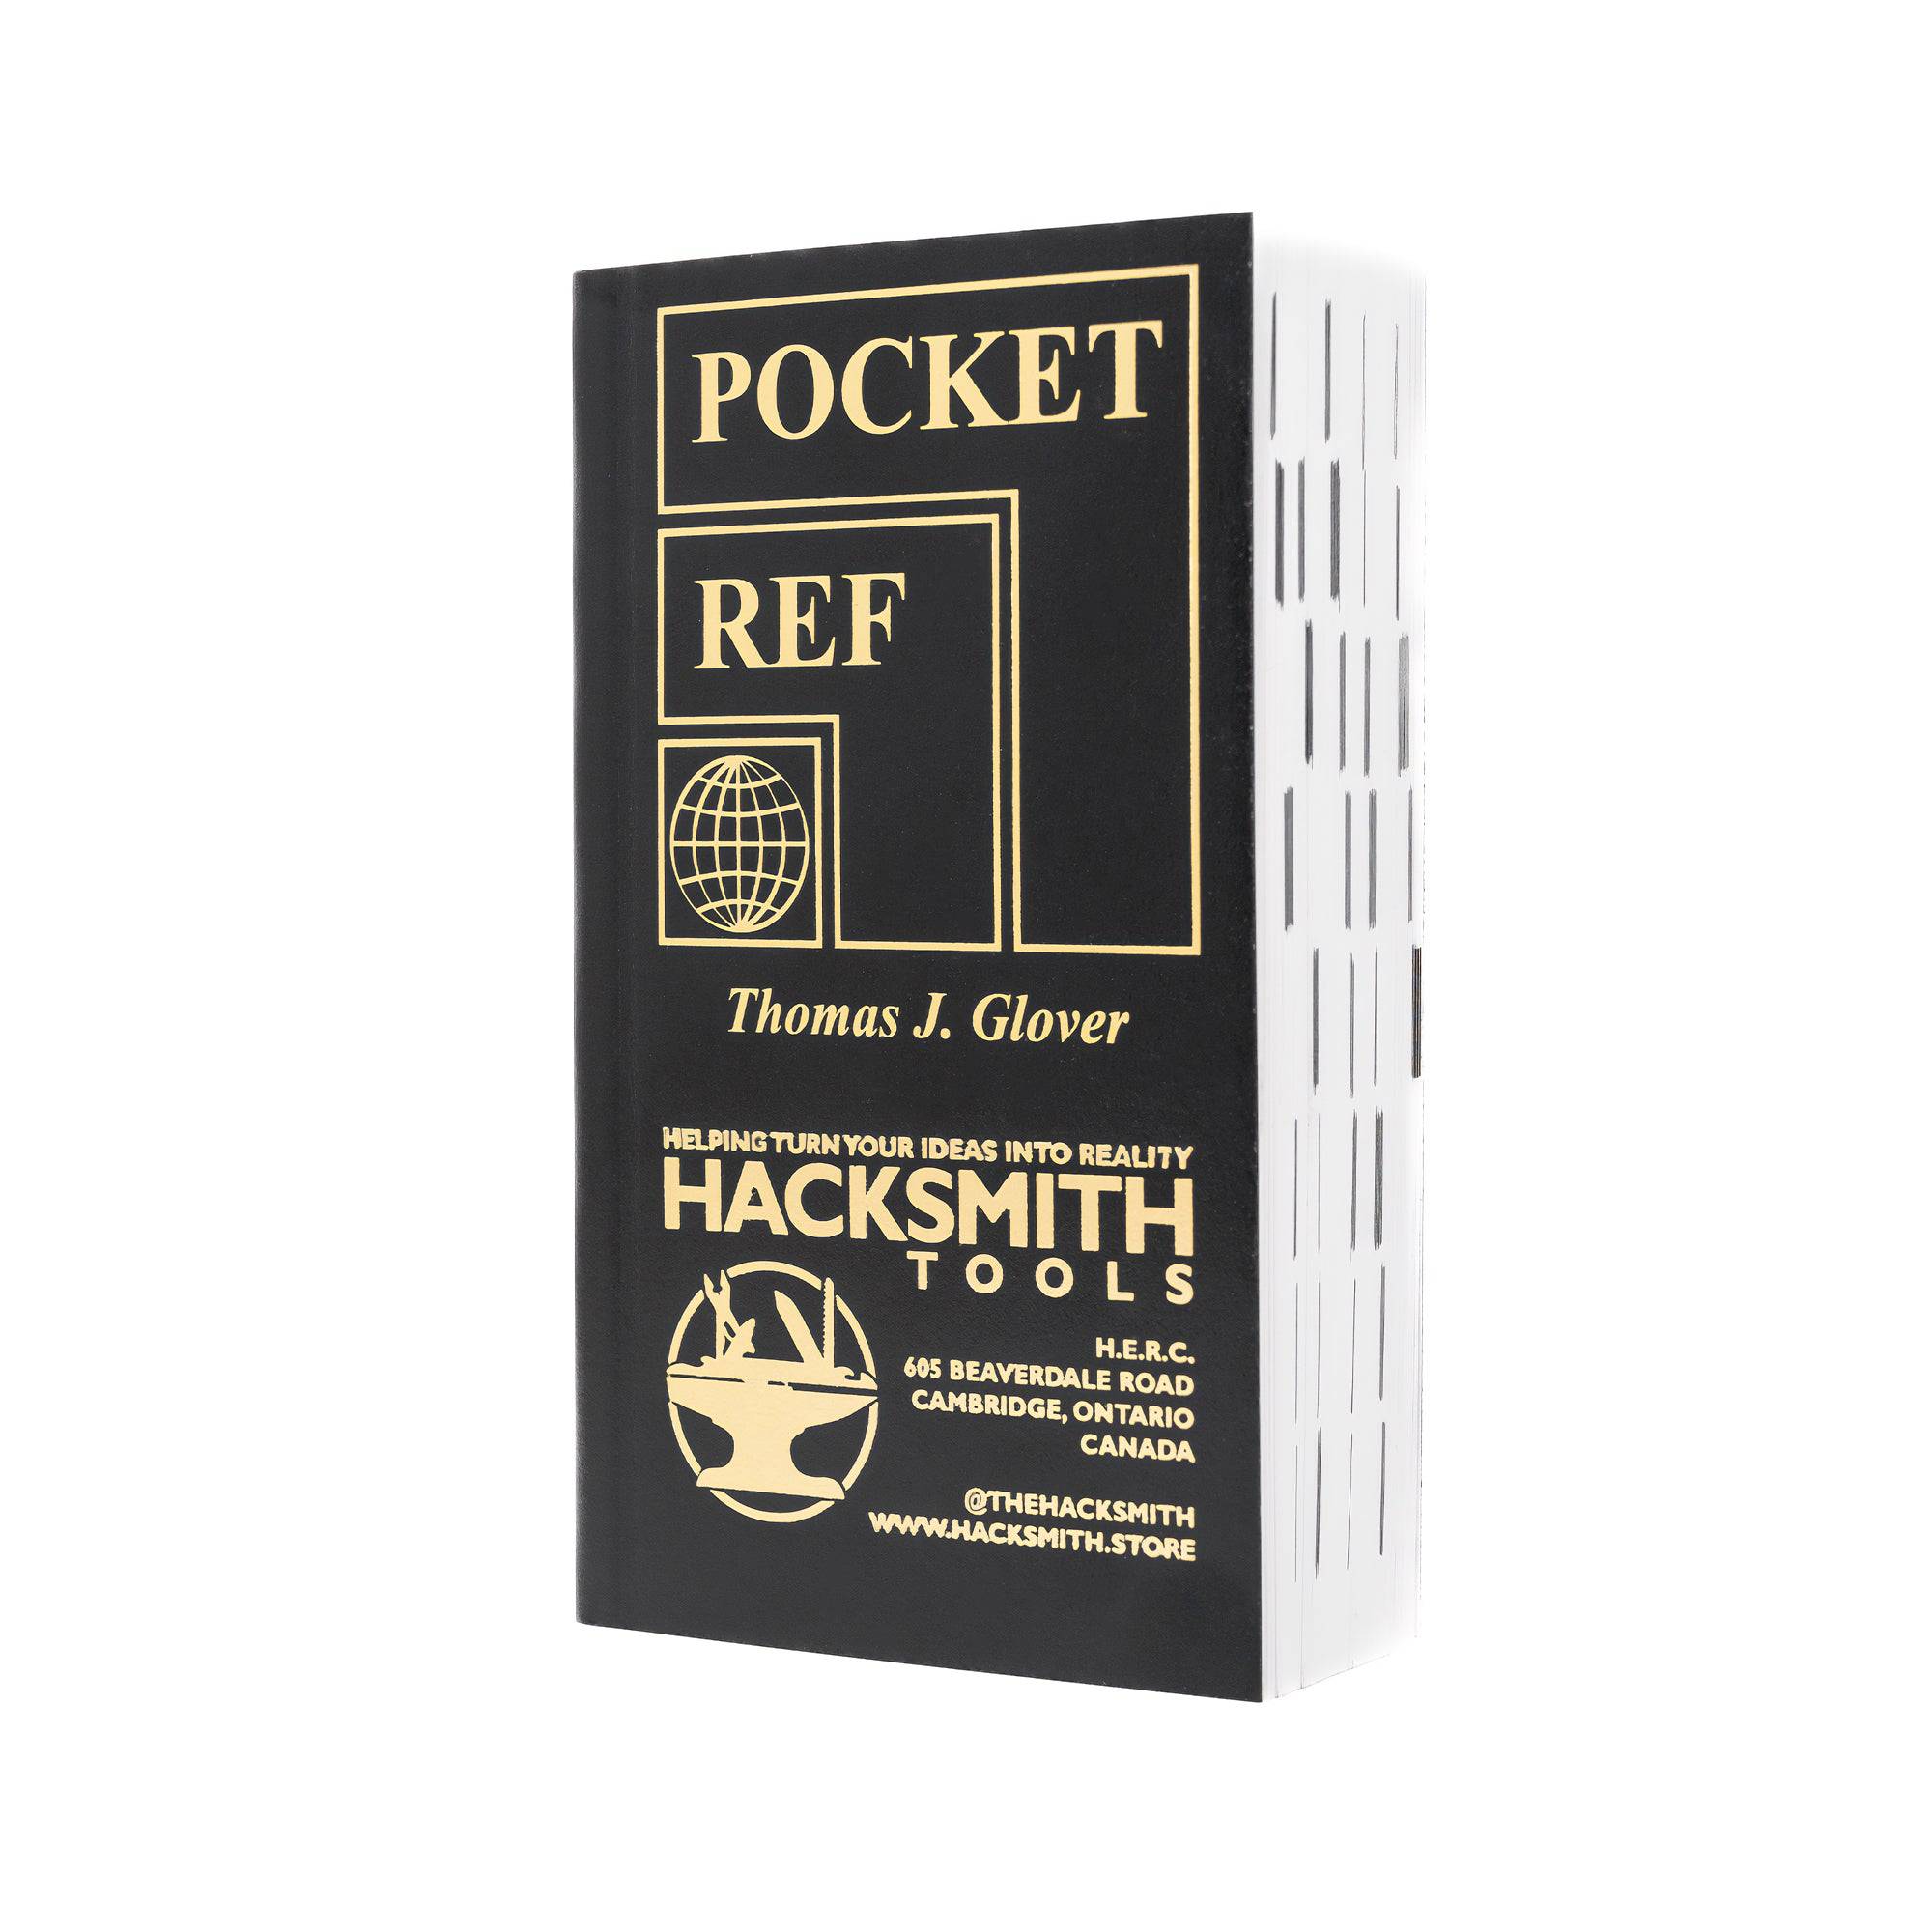 Pocket Reference Book (4th Edition) by Thomas J. Glover - Hacksmith.store